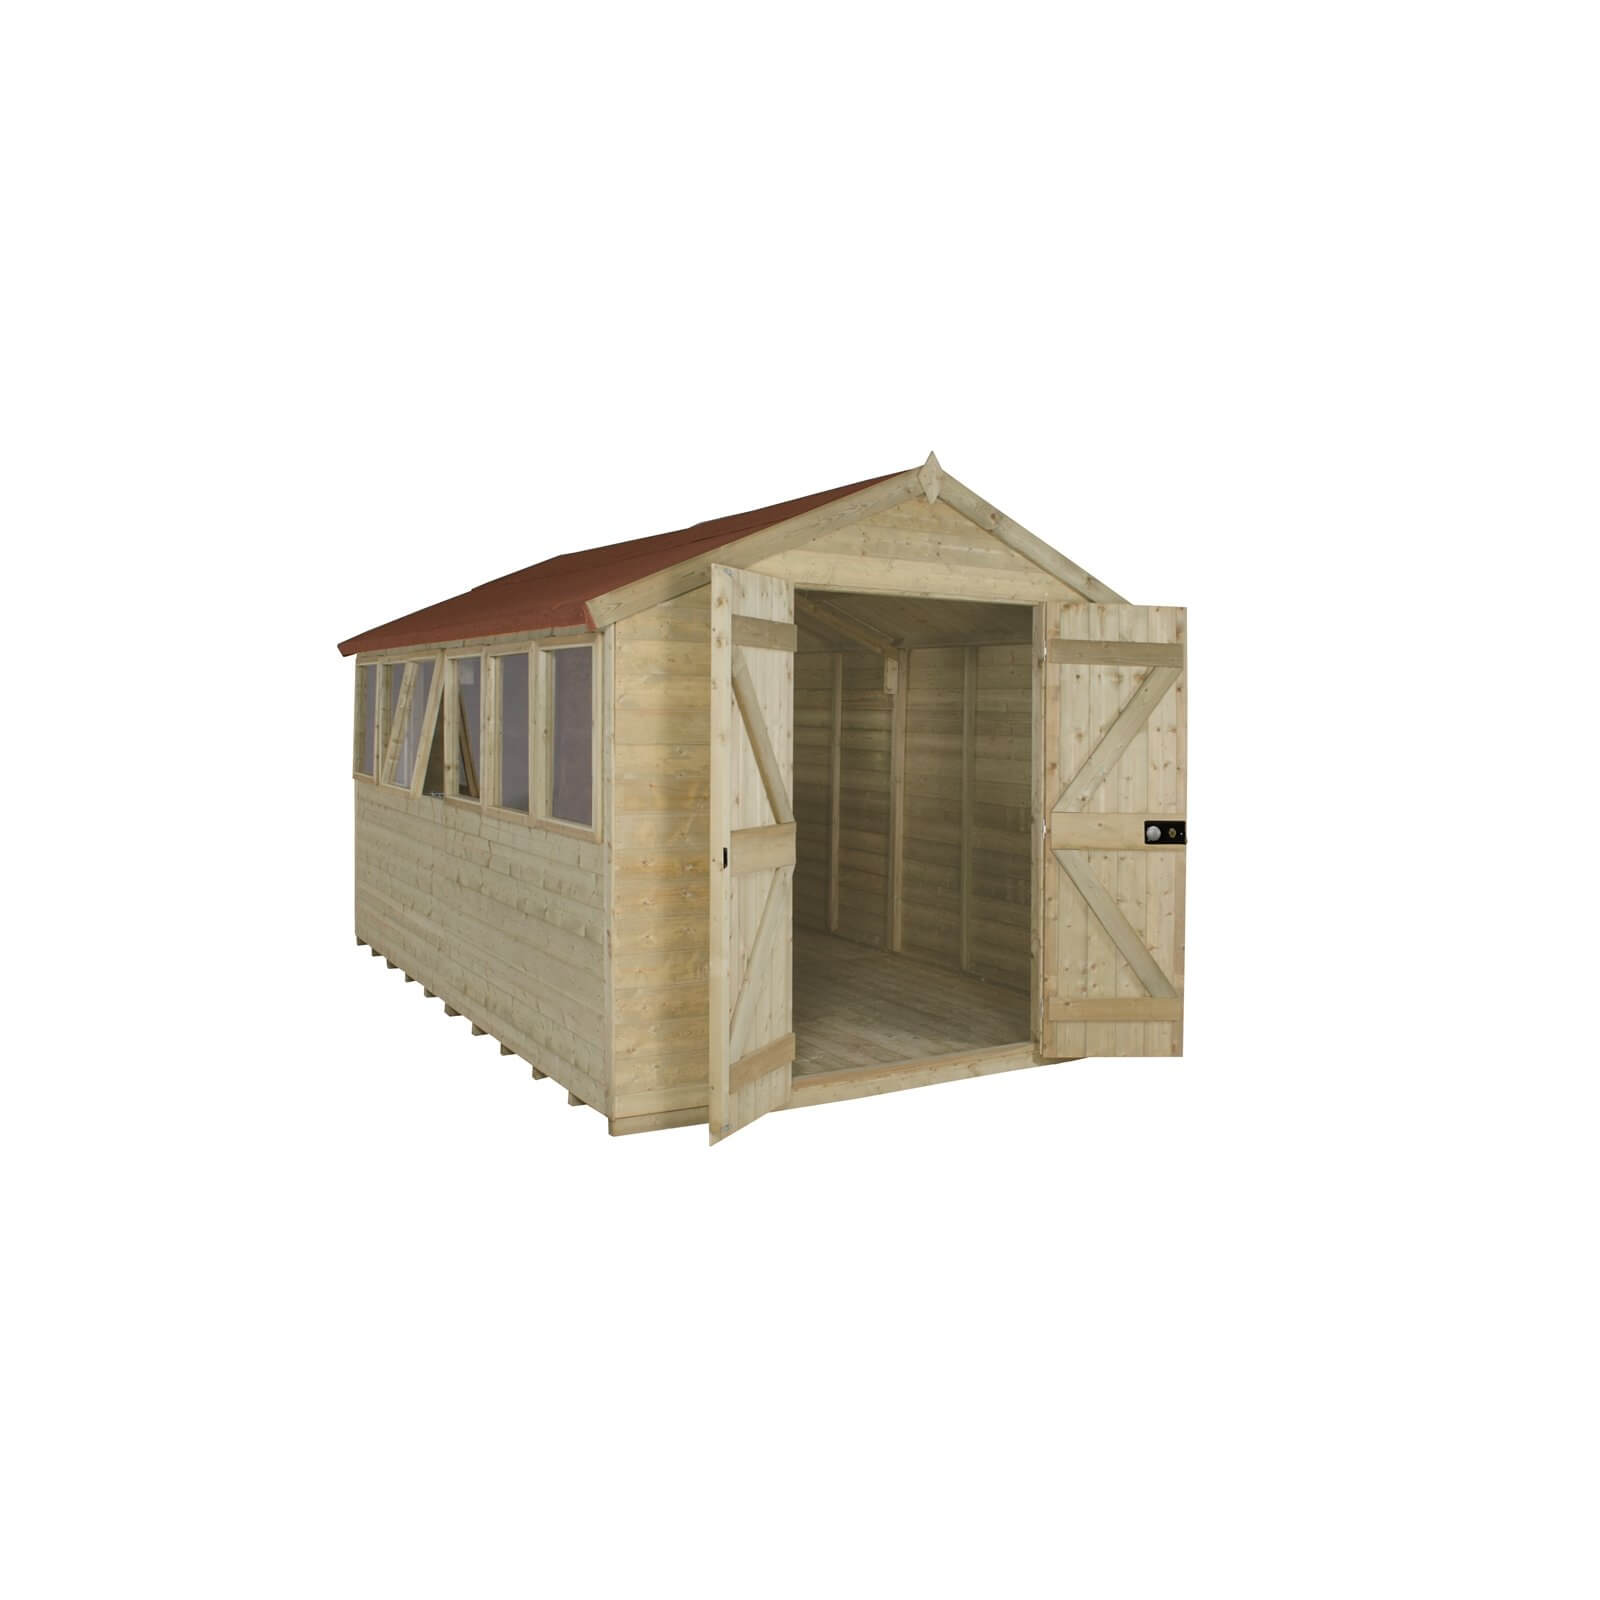 Forest 12 x 8ft Pressure Treated Tongue & Groove Apex Shed